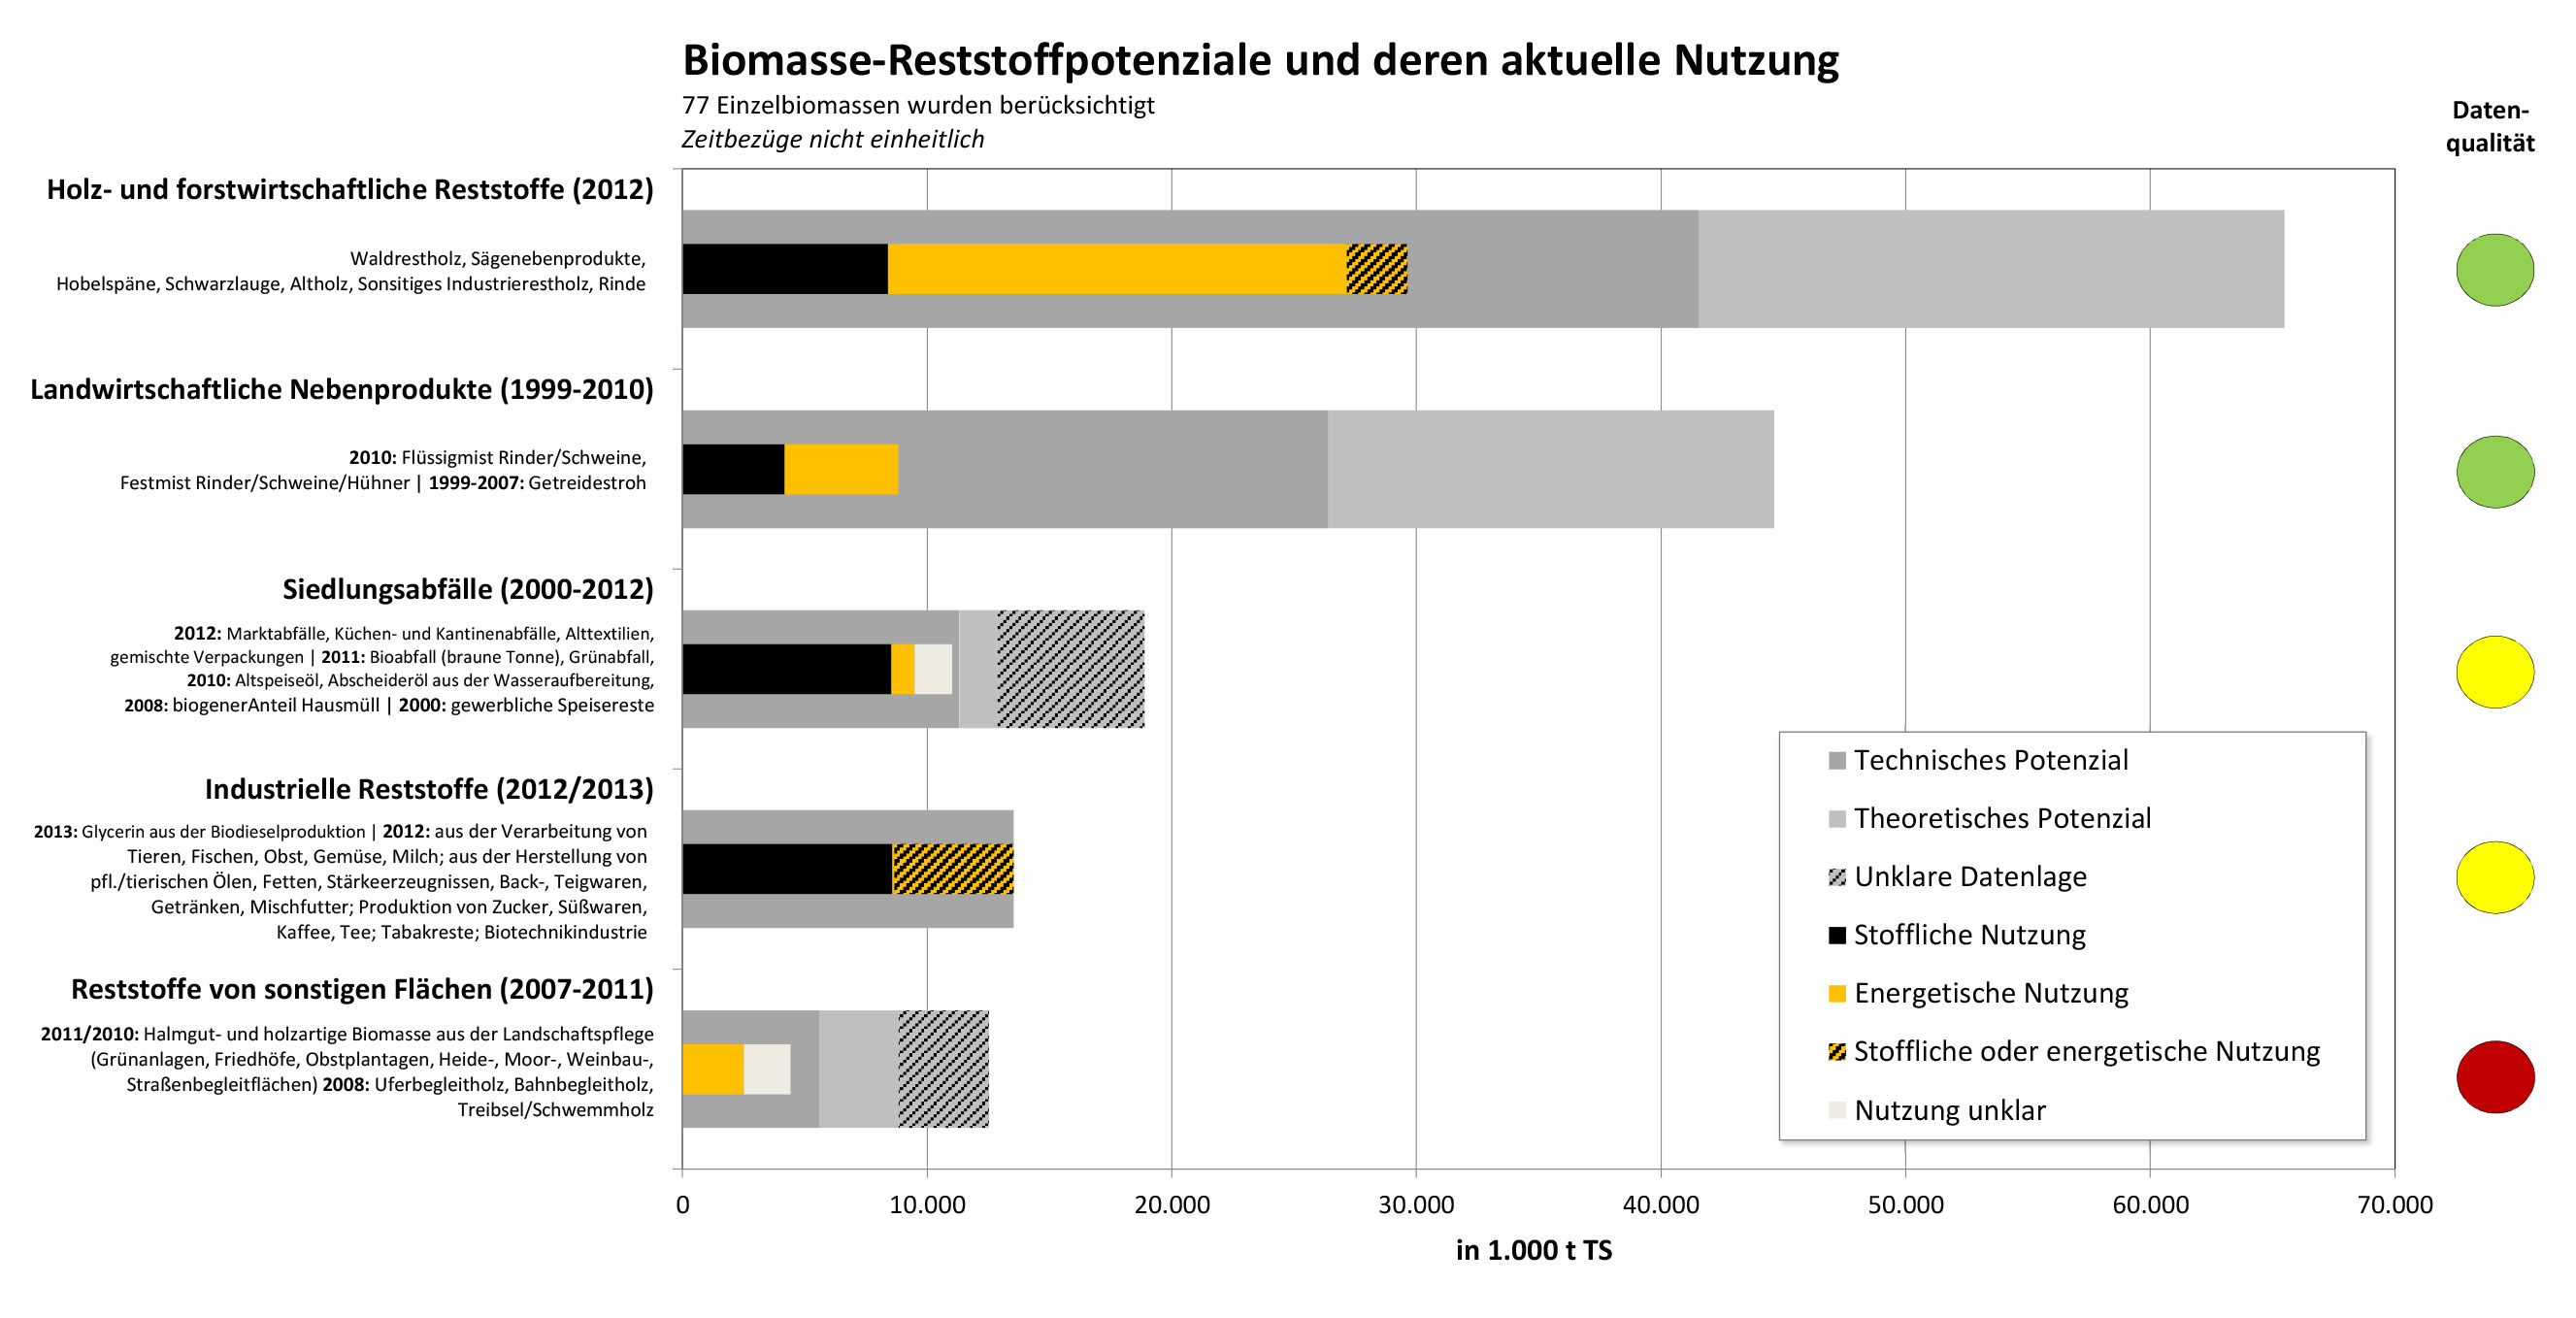 Biomass resource potentials and their current use